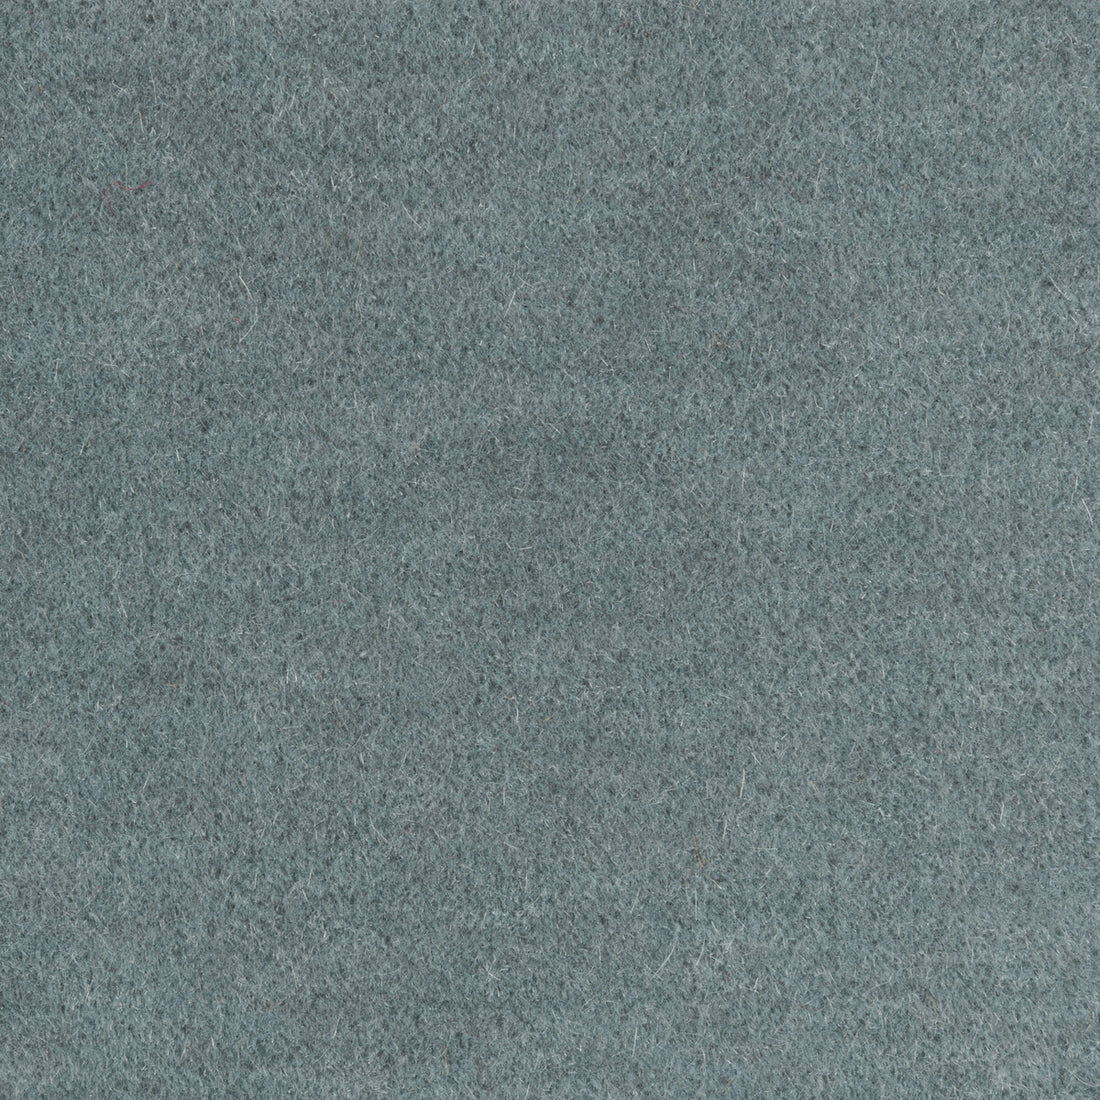 Bachelor Mohair fabric in glacier color - pattern 8014101.1515.0 - by Brunschwig &amp; Fils